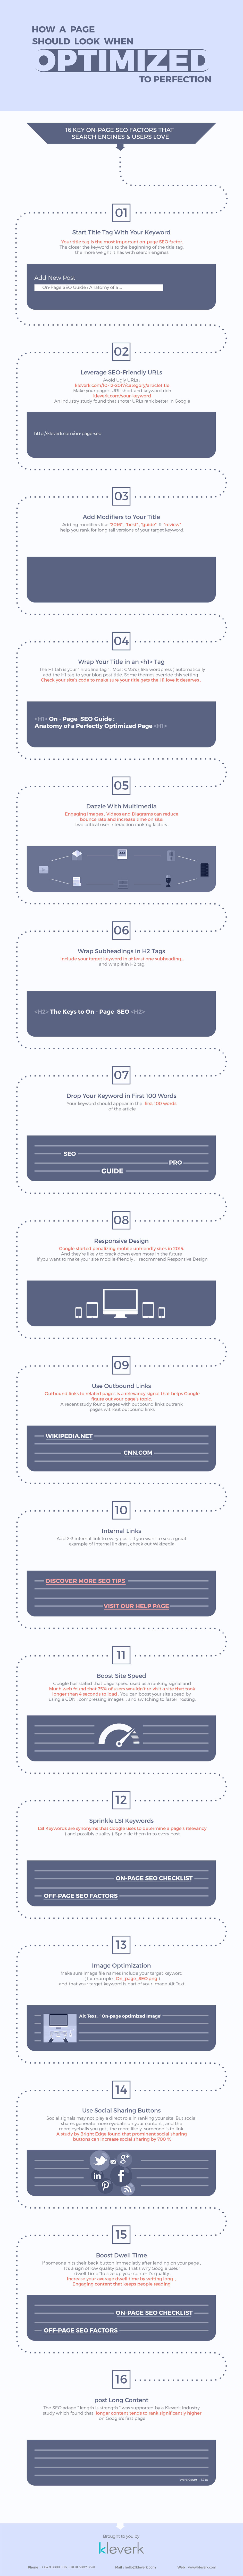 HOW A PAGE SHOULD LOOK WHEN OPTIMIZED TO PERFECTION [ INFOGRAPHIC ]